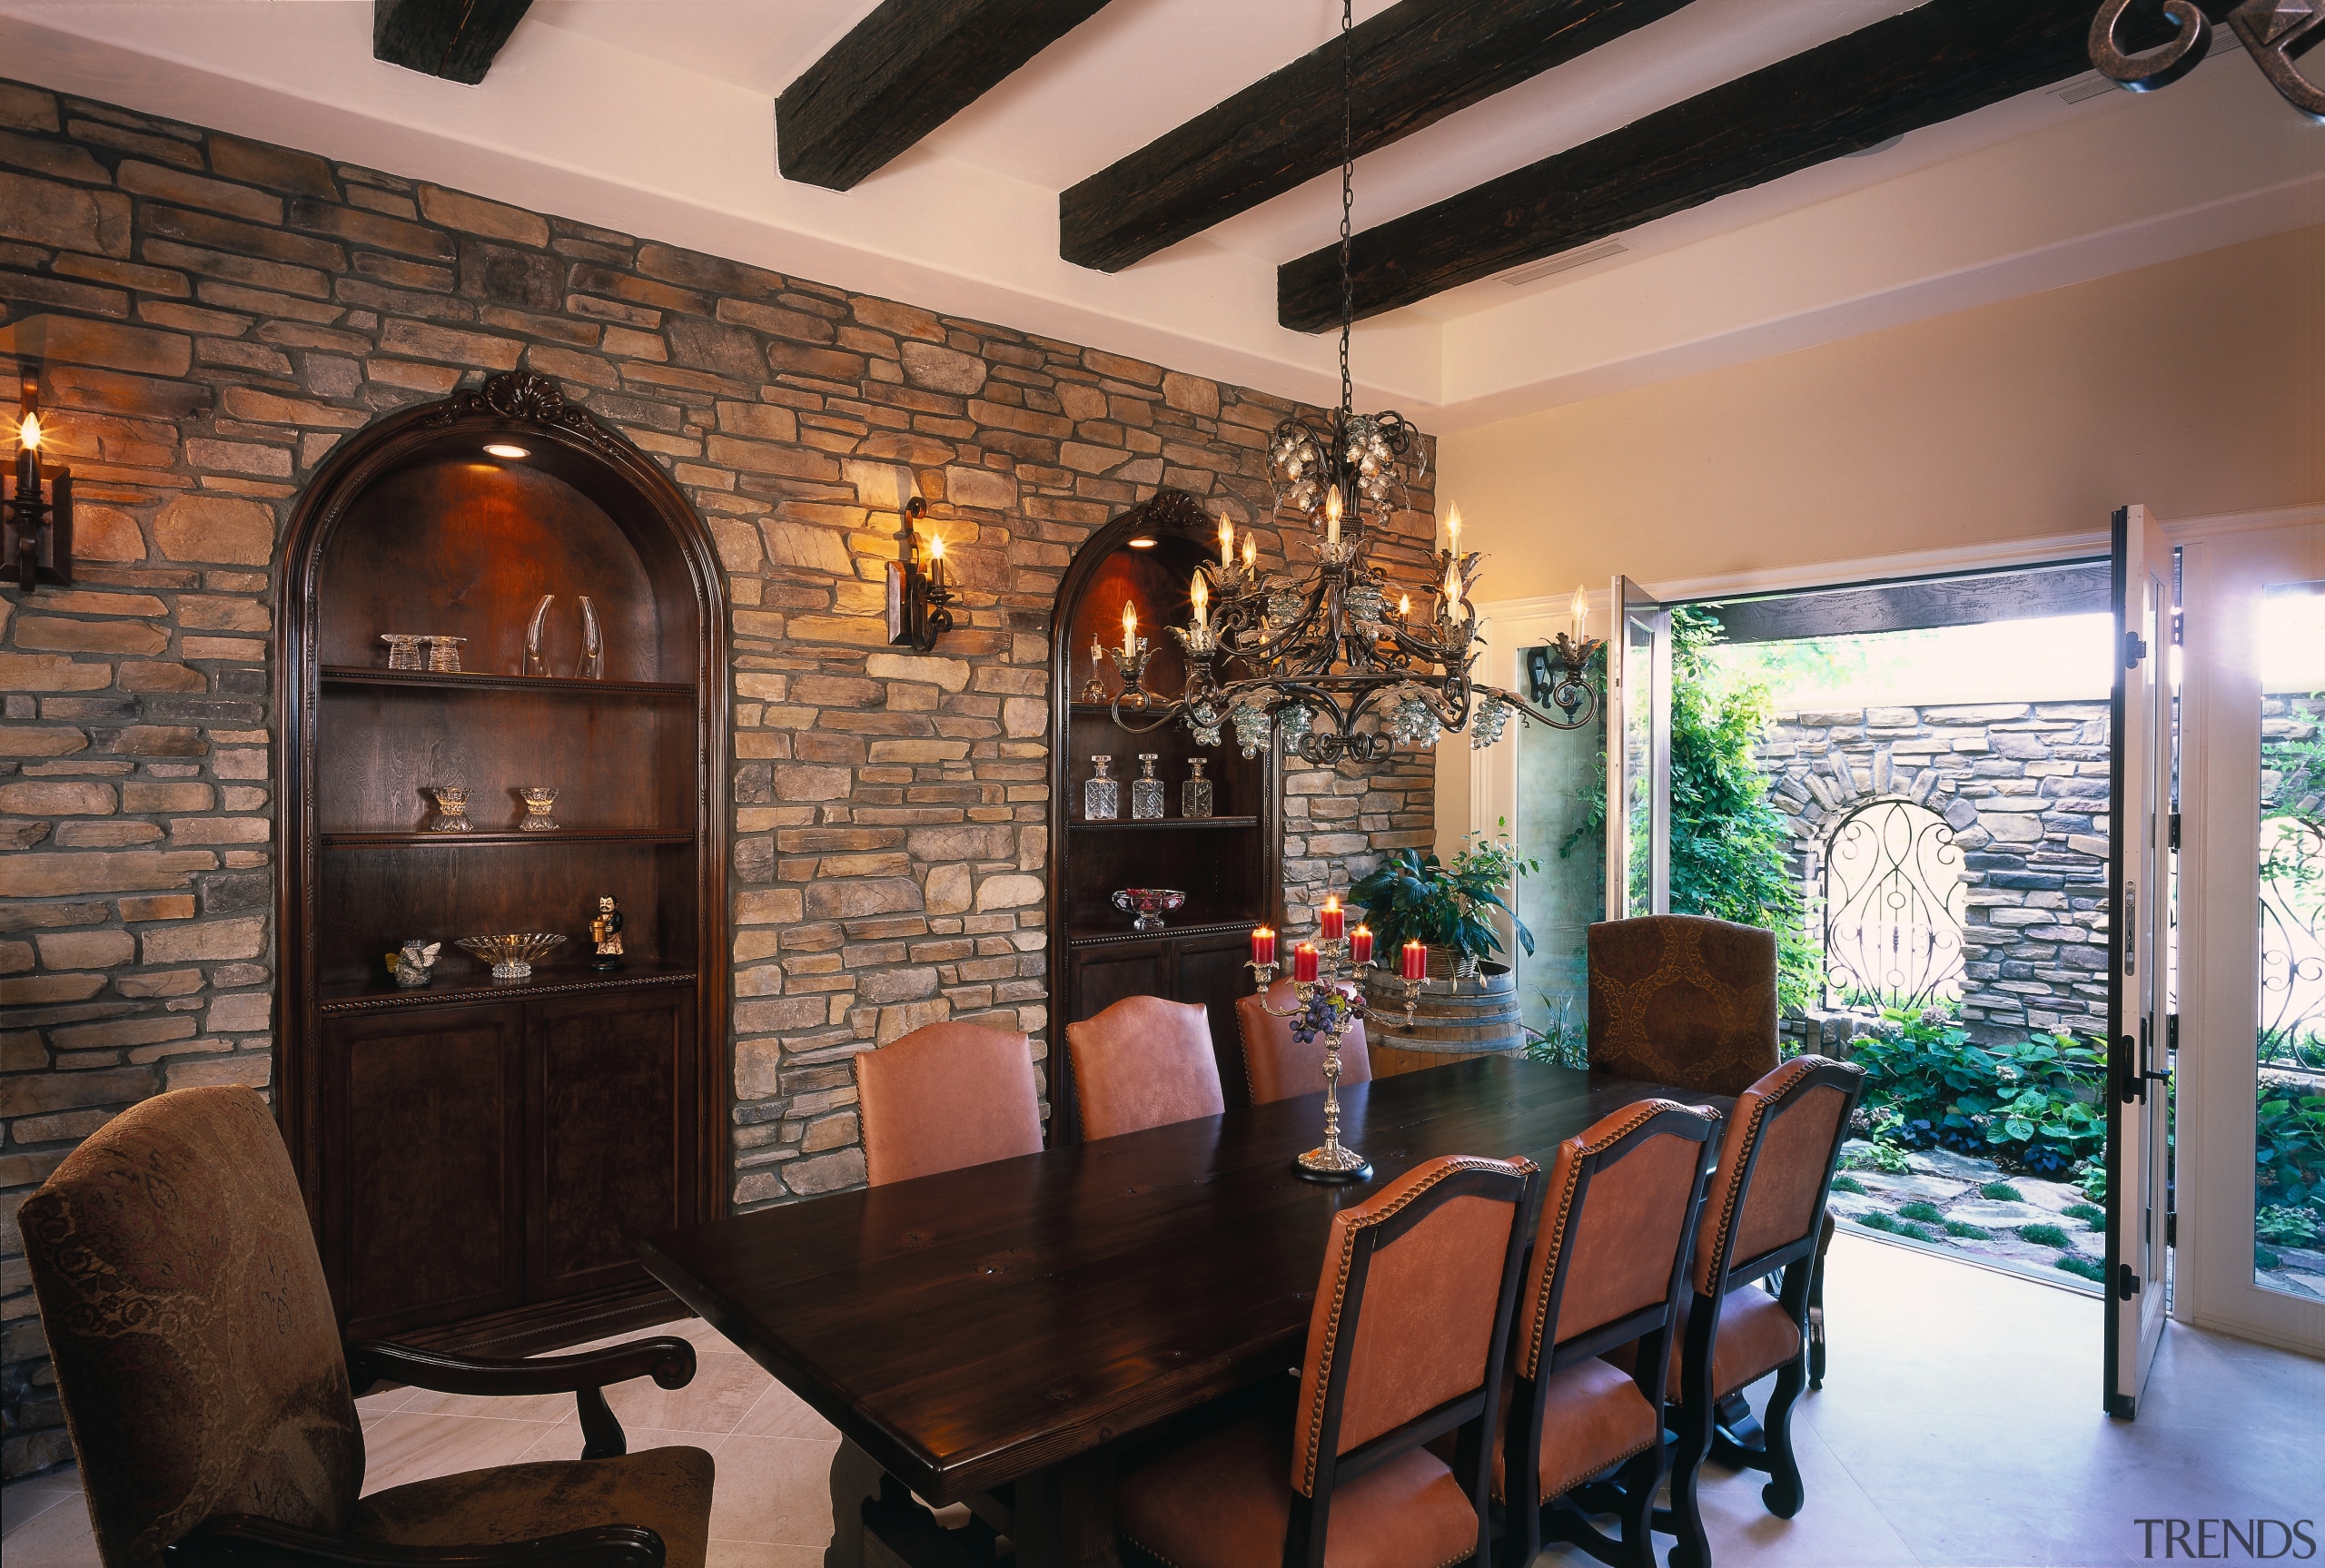 view of the masonry wall showing archway shelving ceiling, dining room, home, interior design, living room, real estate, room, table, wall, black